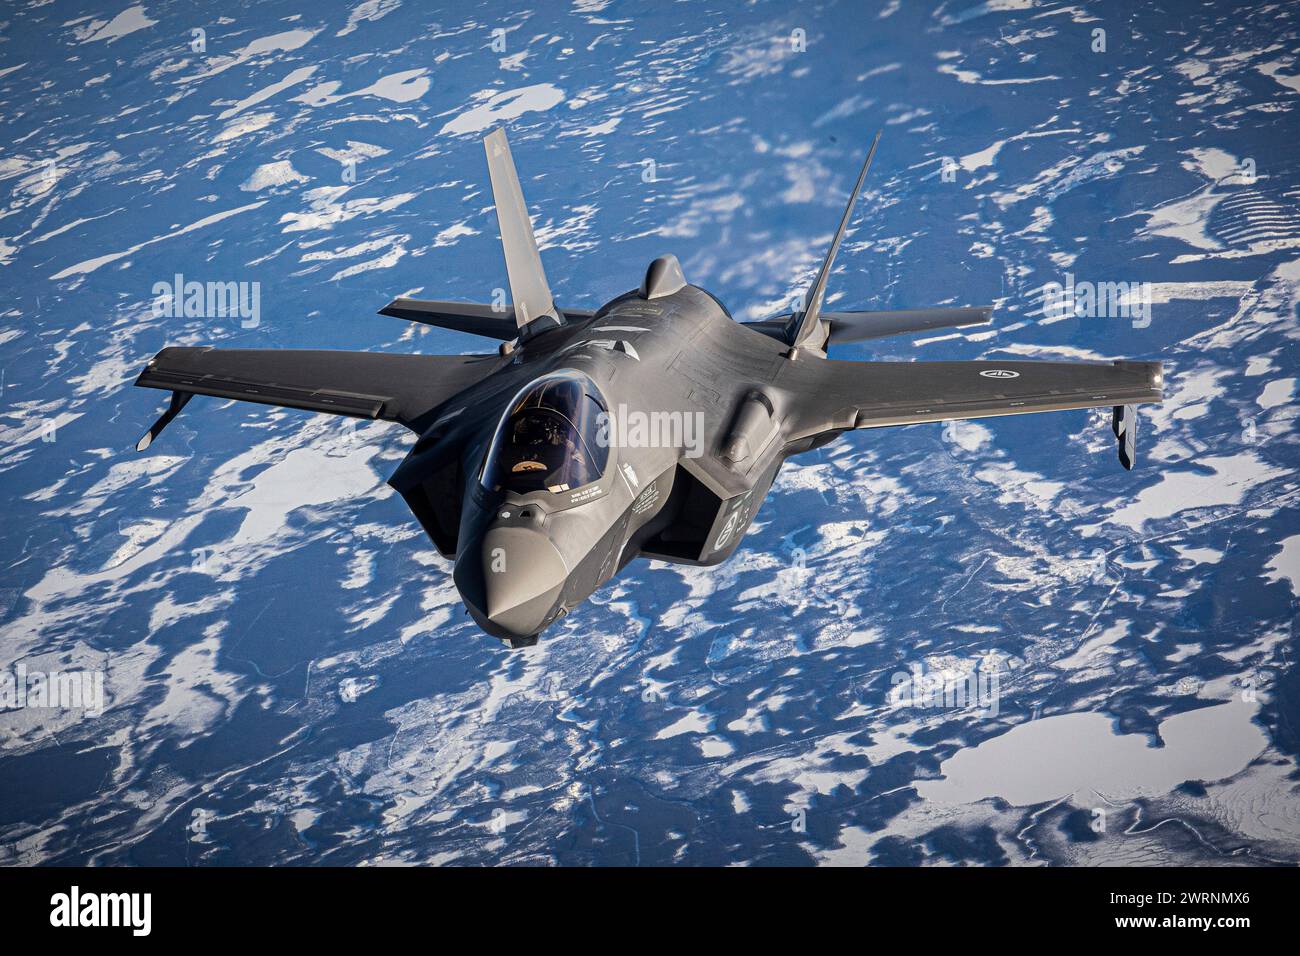 Swedish Airspace, Sweden. 11 March, 2024. A Norwegian Royal Air Force F-35 Lightning II stealth fighter aircraft, approaches to refuel from an U.S Air Force KC-135 Stratotanker during exercise Nordic Response 24, March 11, 2024 over Sweden. Nordic Response is a yearly multinational exercise led by Norway.  Credit: MSgt. Andrew Sinclair/U.S. Air Force/Alamy Live News Credit: MSgt. Andrew Sinclair/U.S. Air Force/Alamy Live News Stock Photo